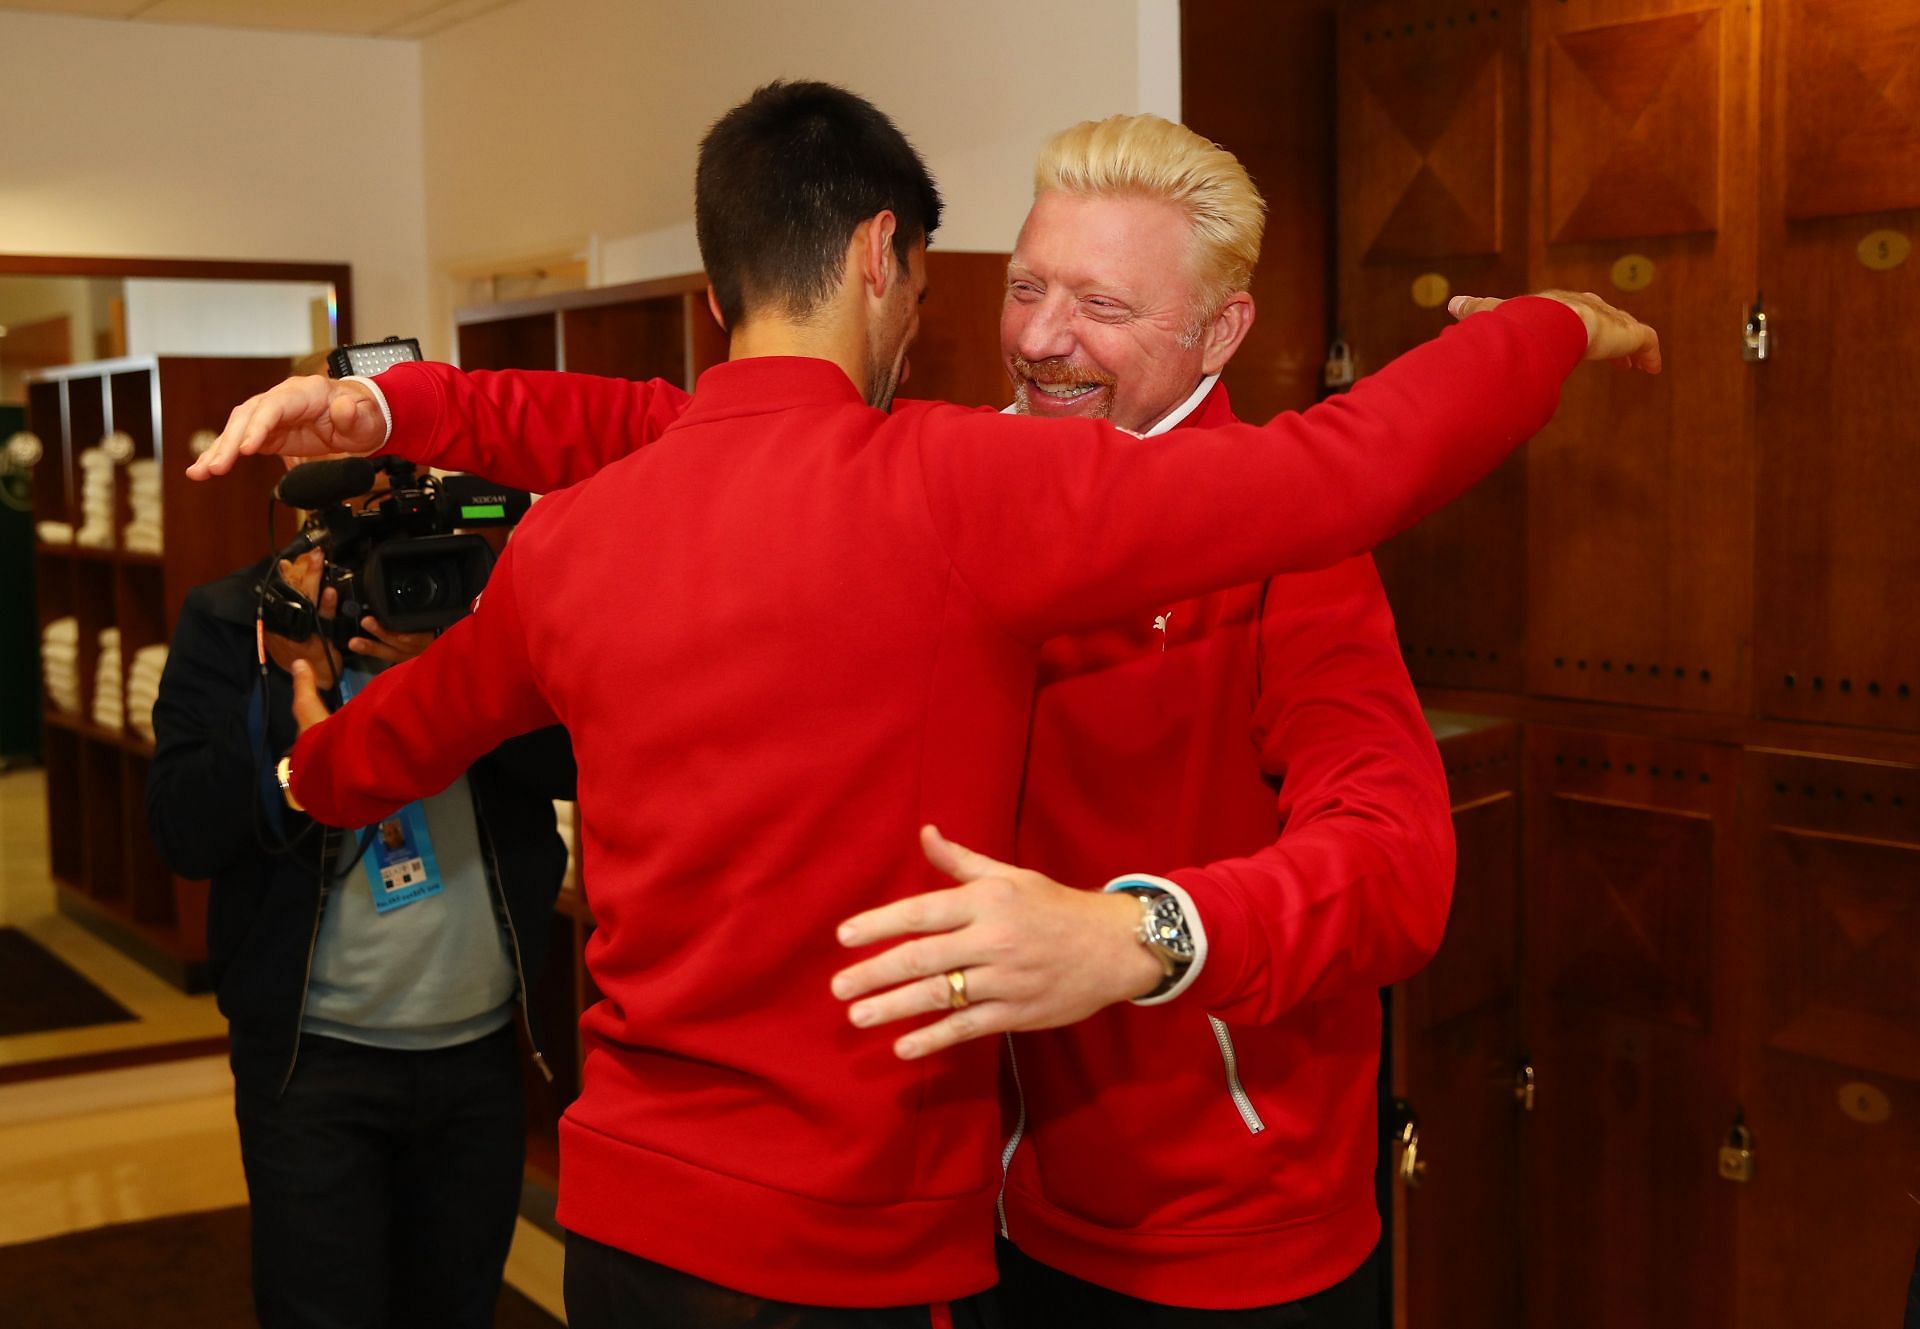 Boris Becker (R) pictured with Novak Djokovic at the 2016 French Open